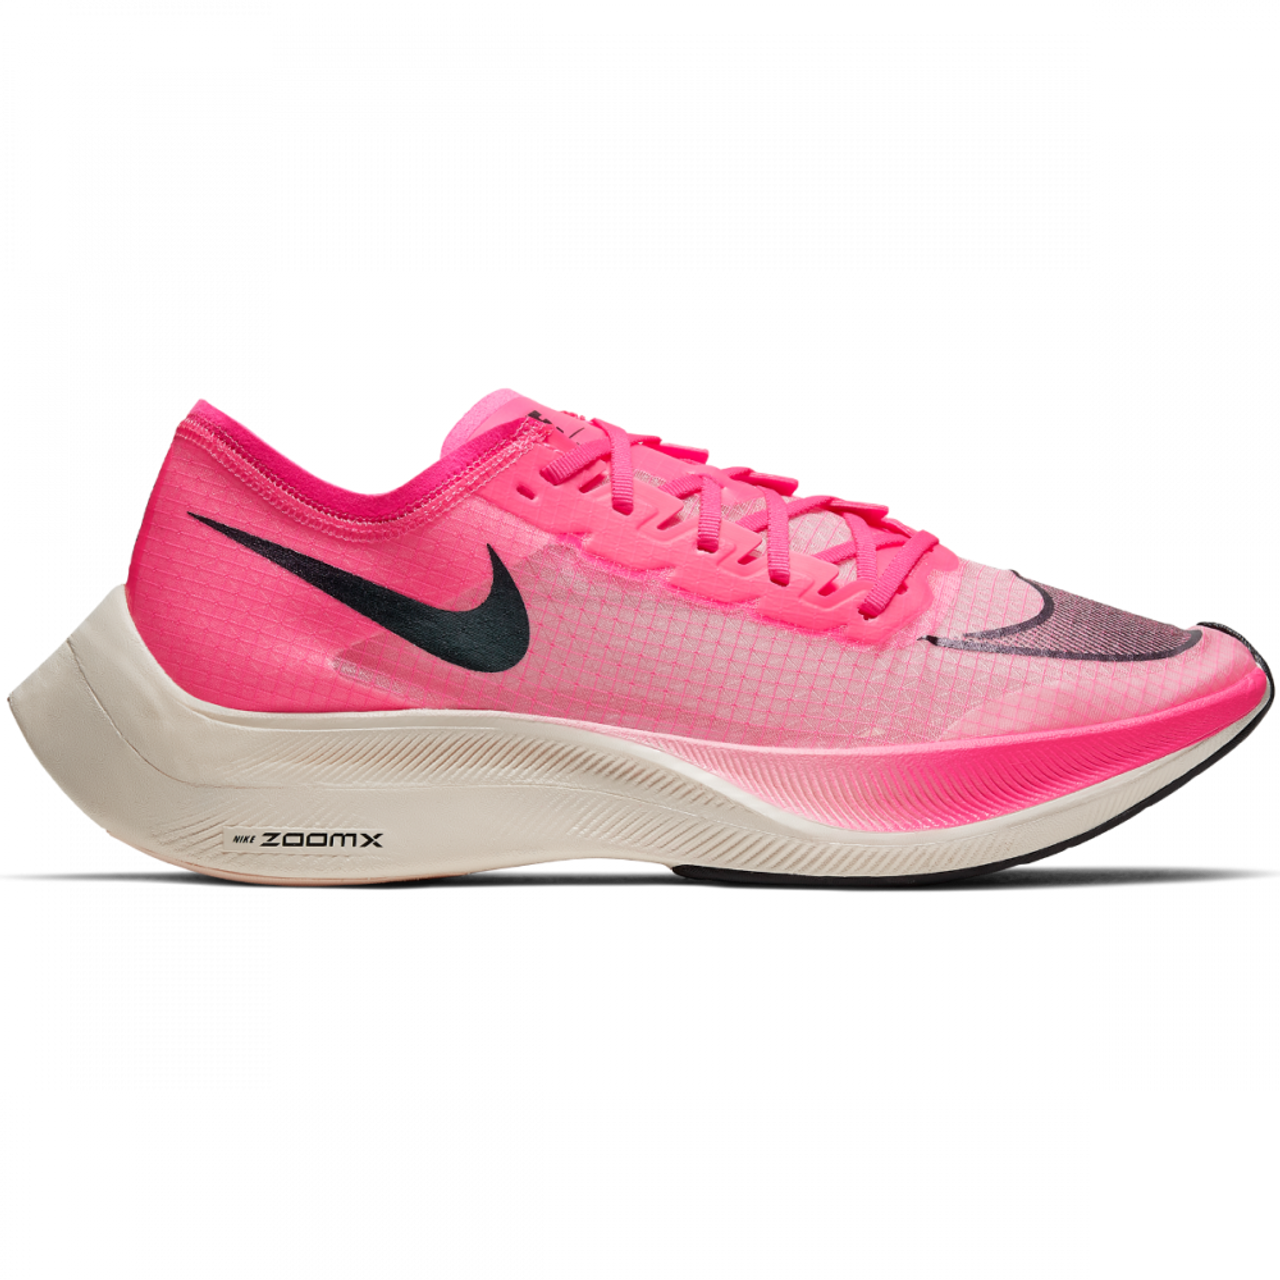 vaporfly next for sale